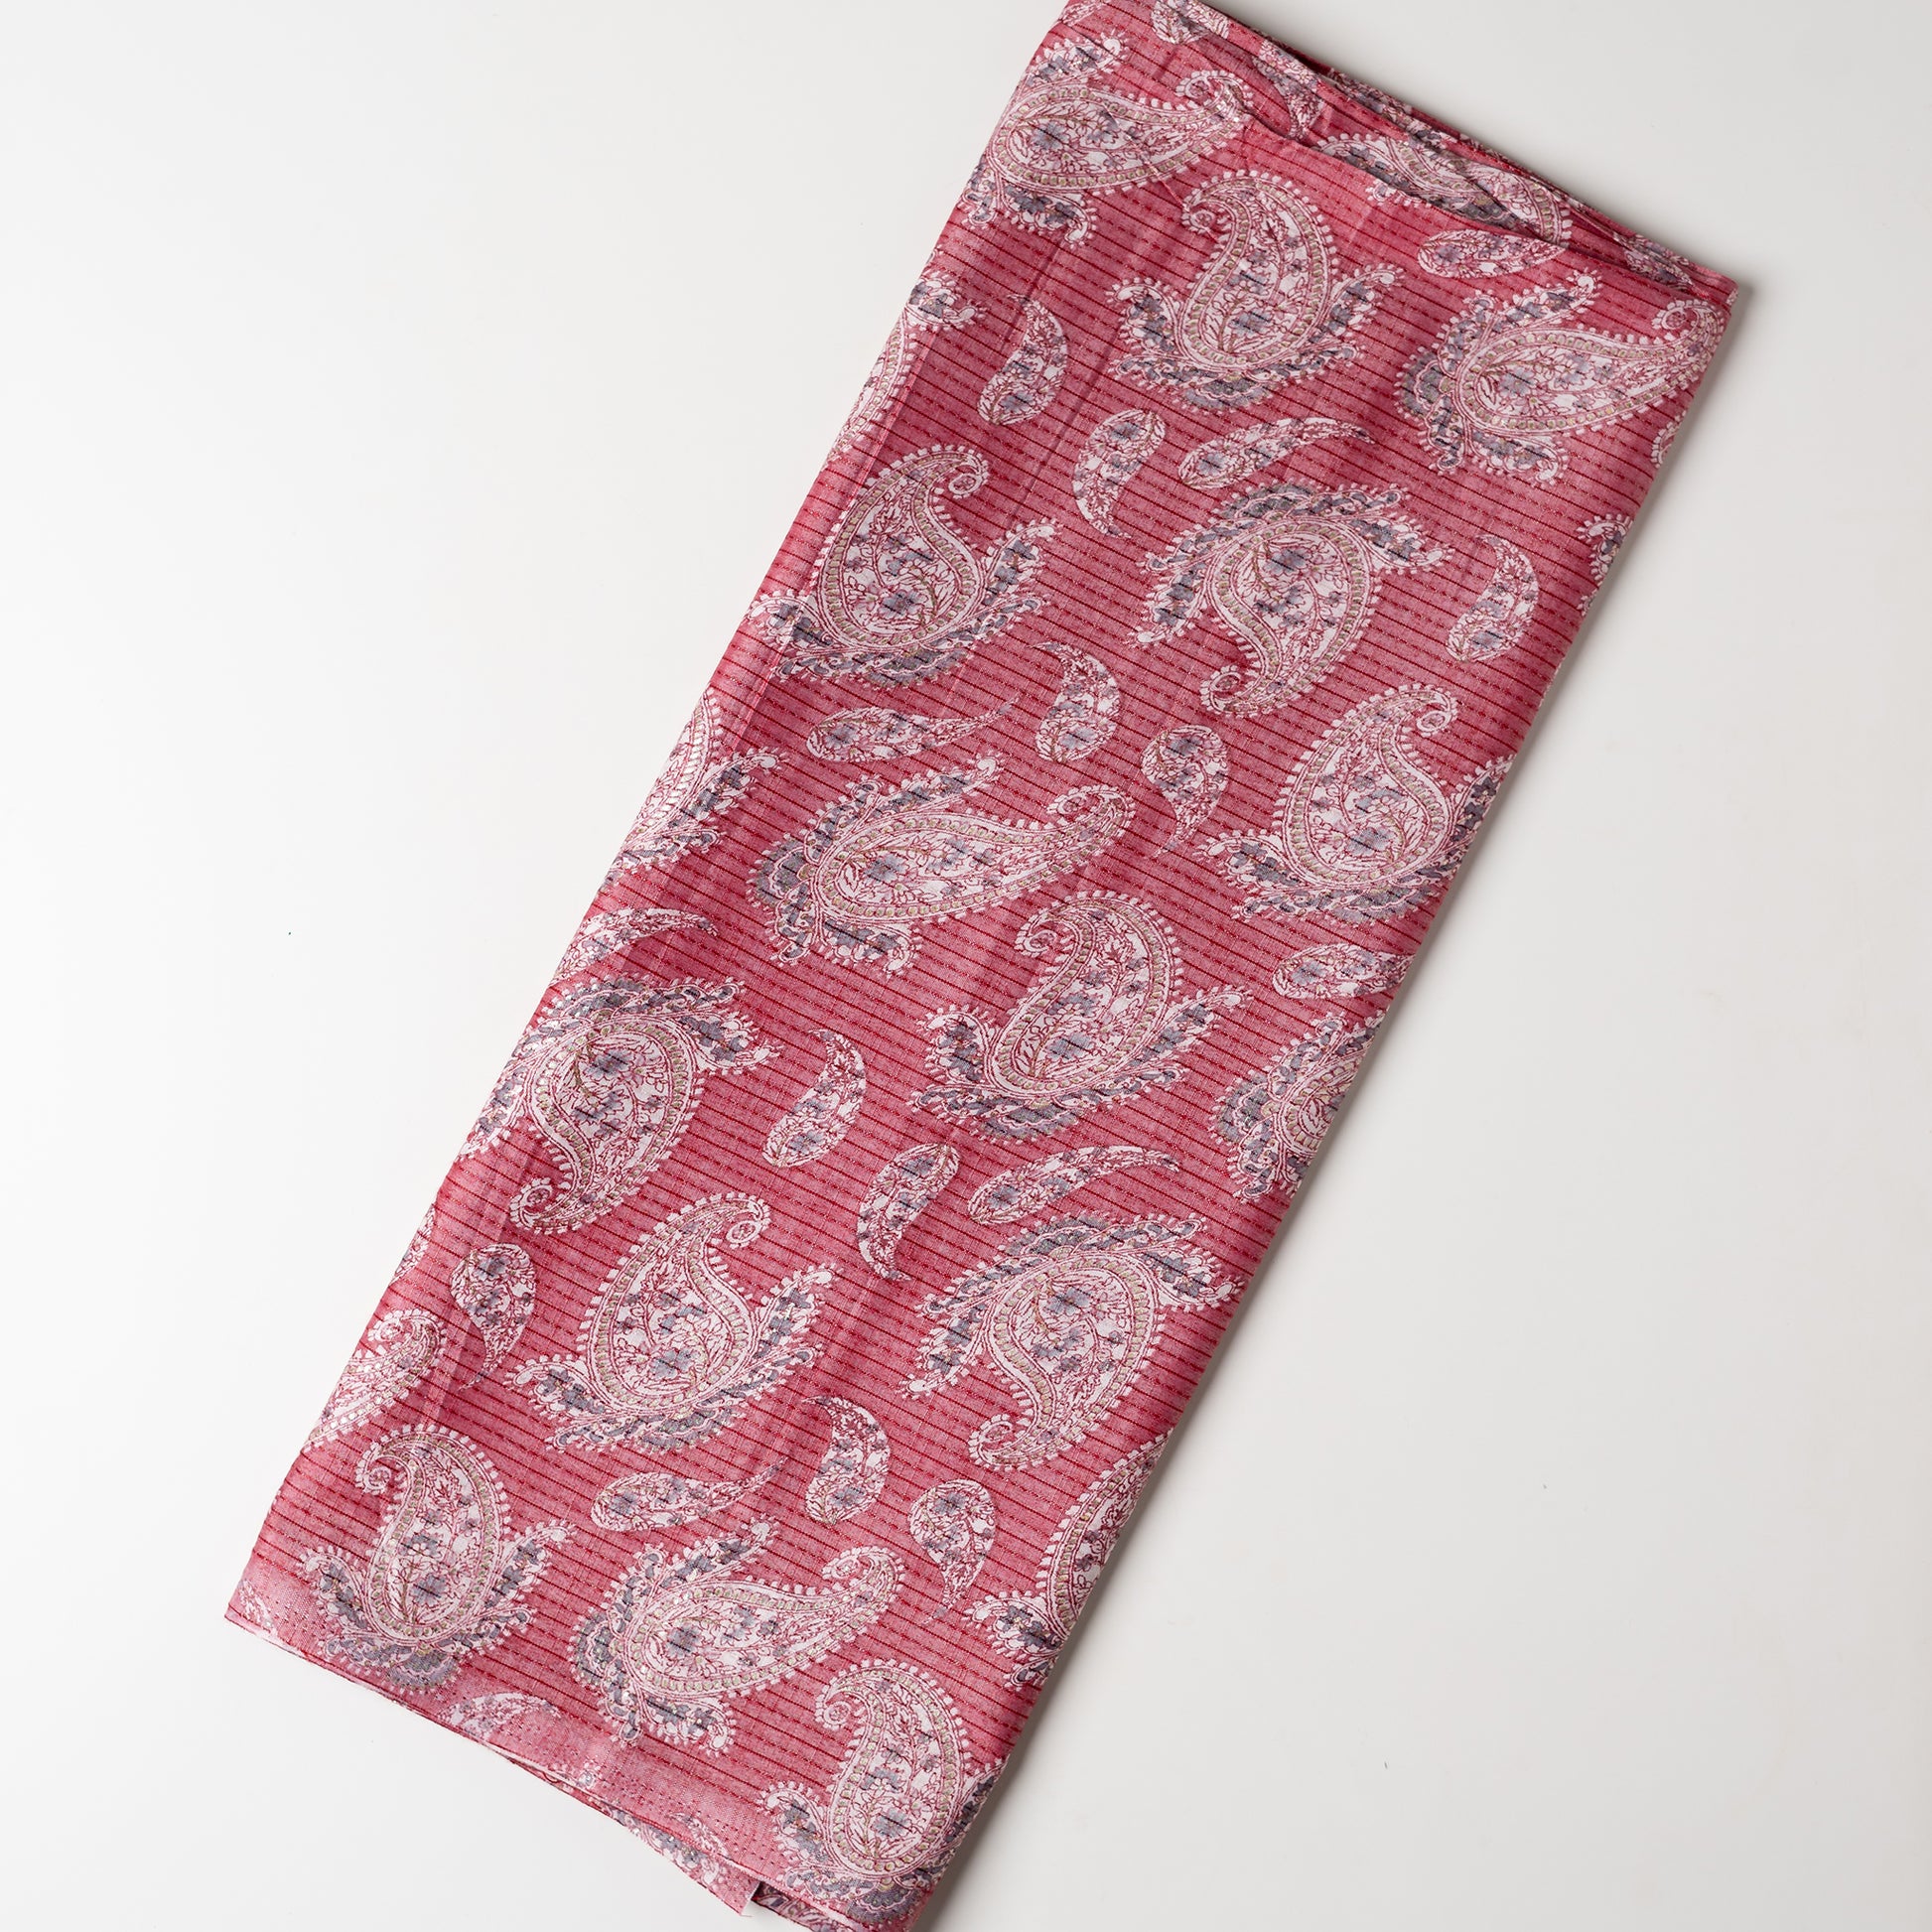 light pink foil printed cotton fabric 